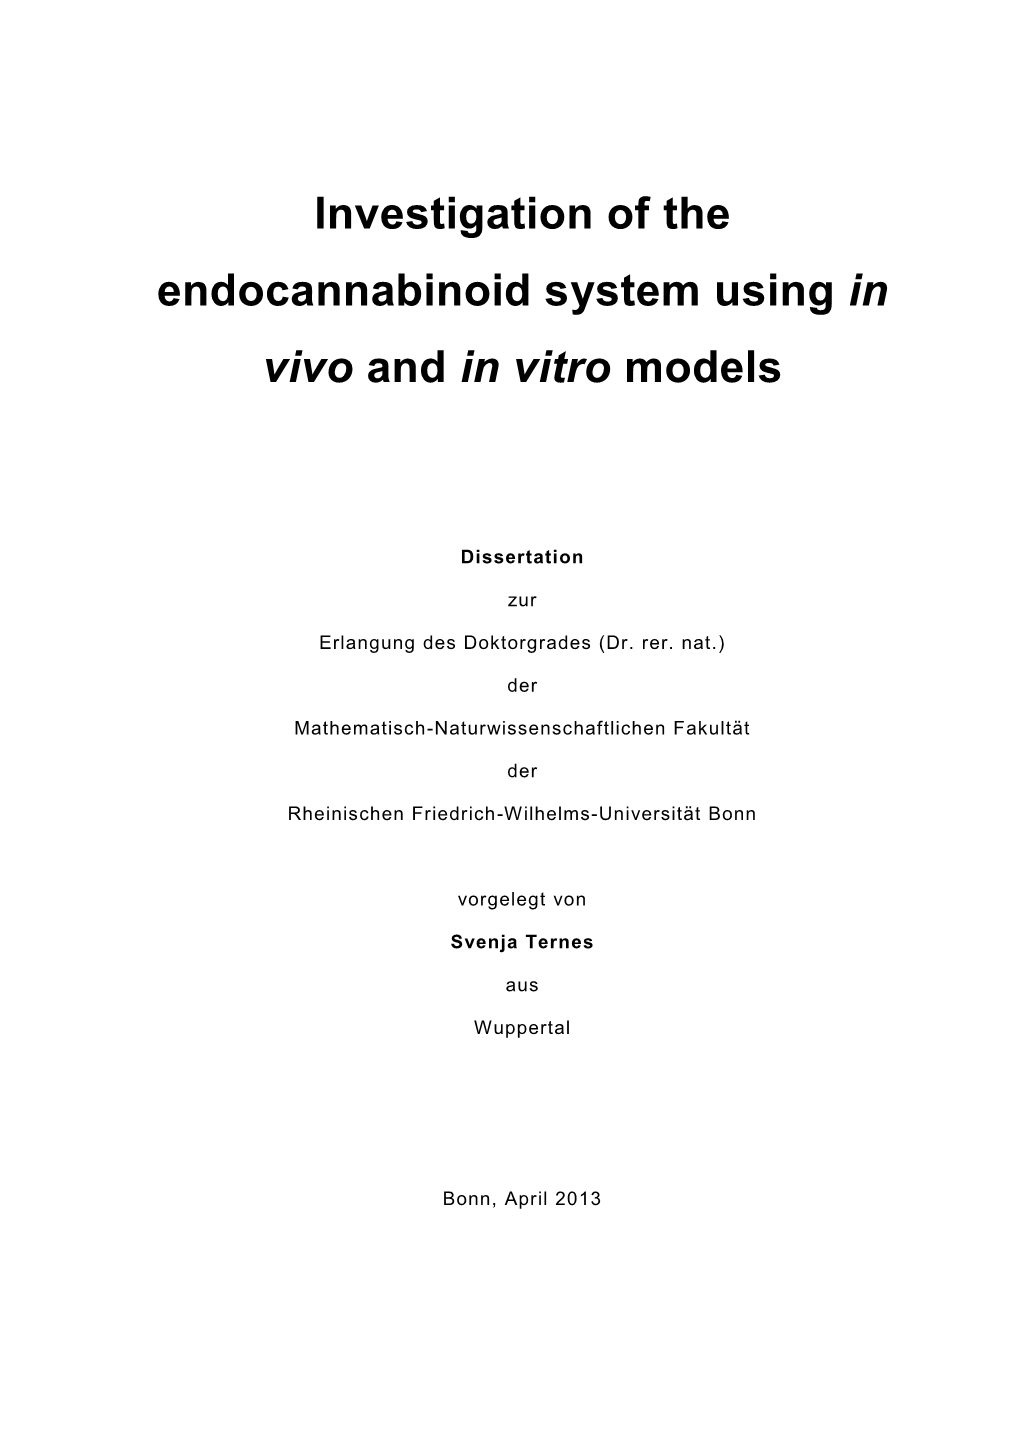 Investigation of the Endocannabinoid System Using in Vivo and in Vitro Models” Entirely by Myself Except Otherwise Stated